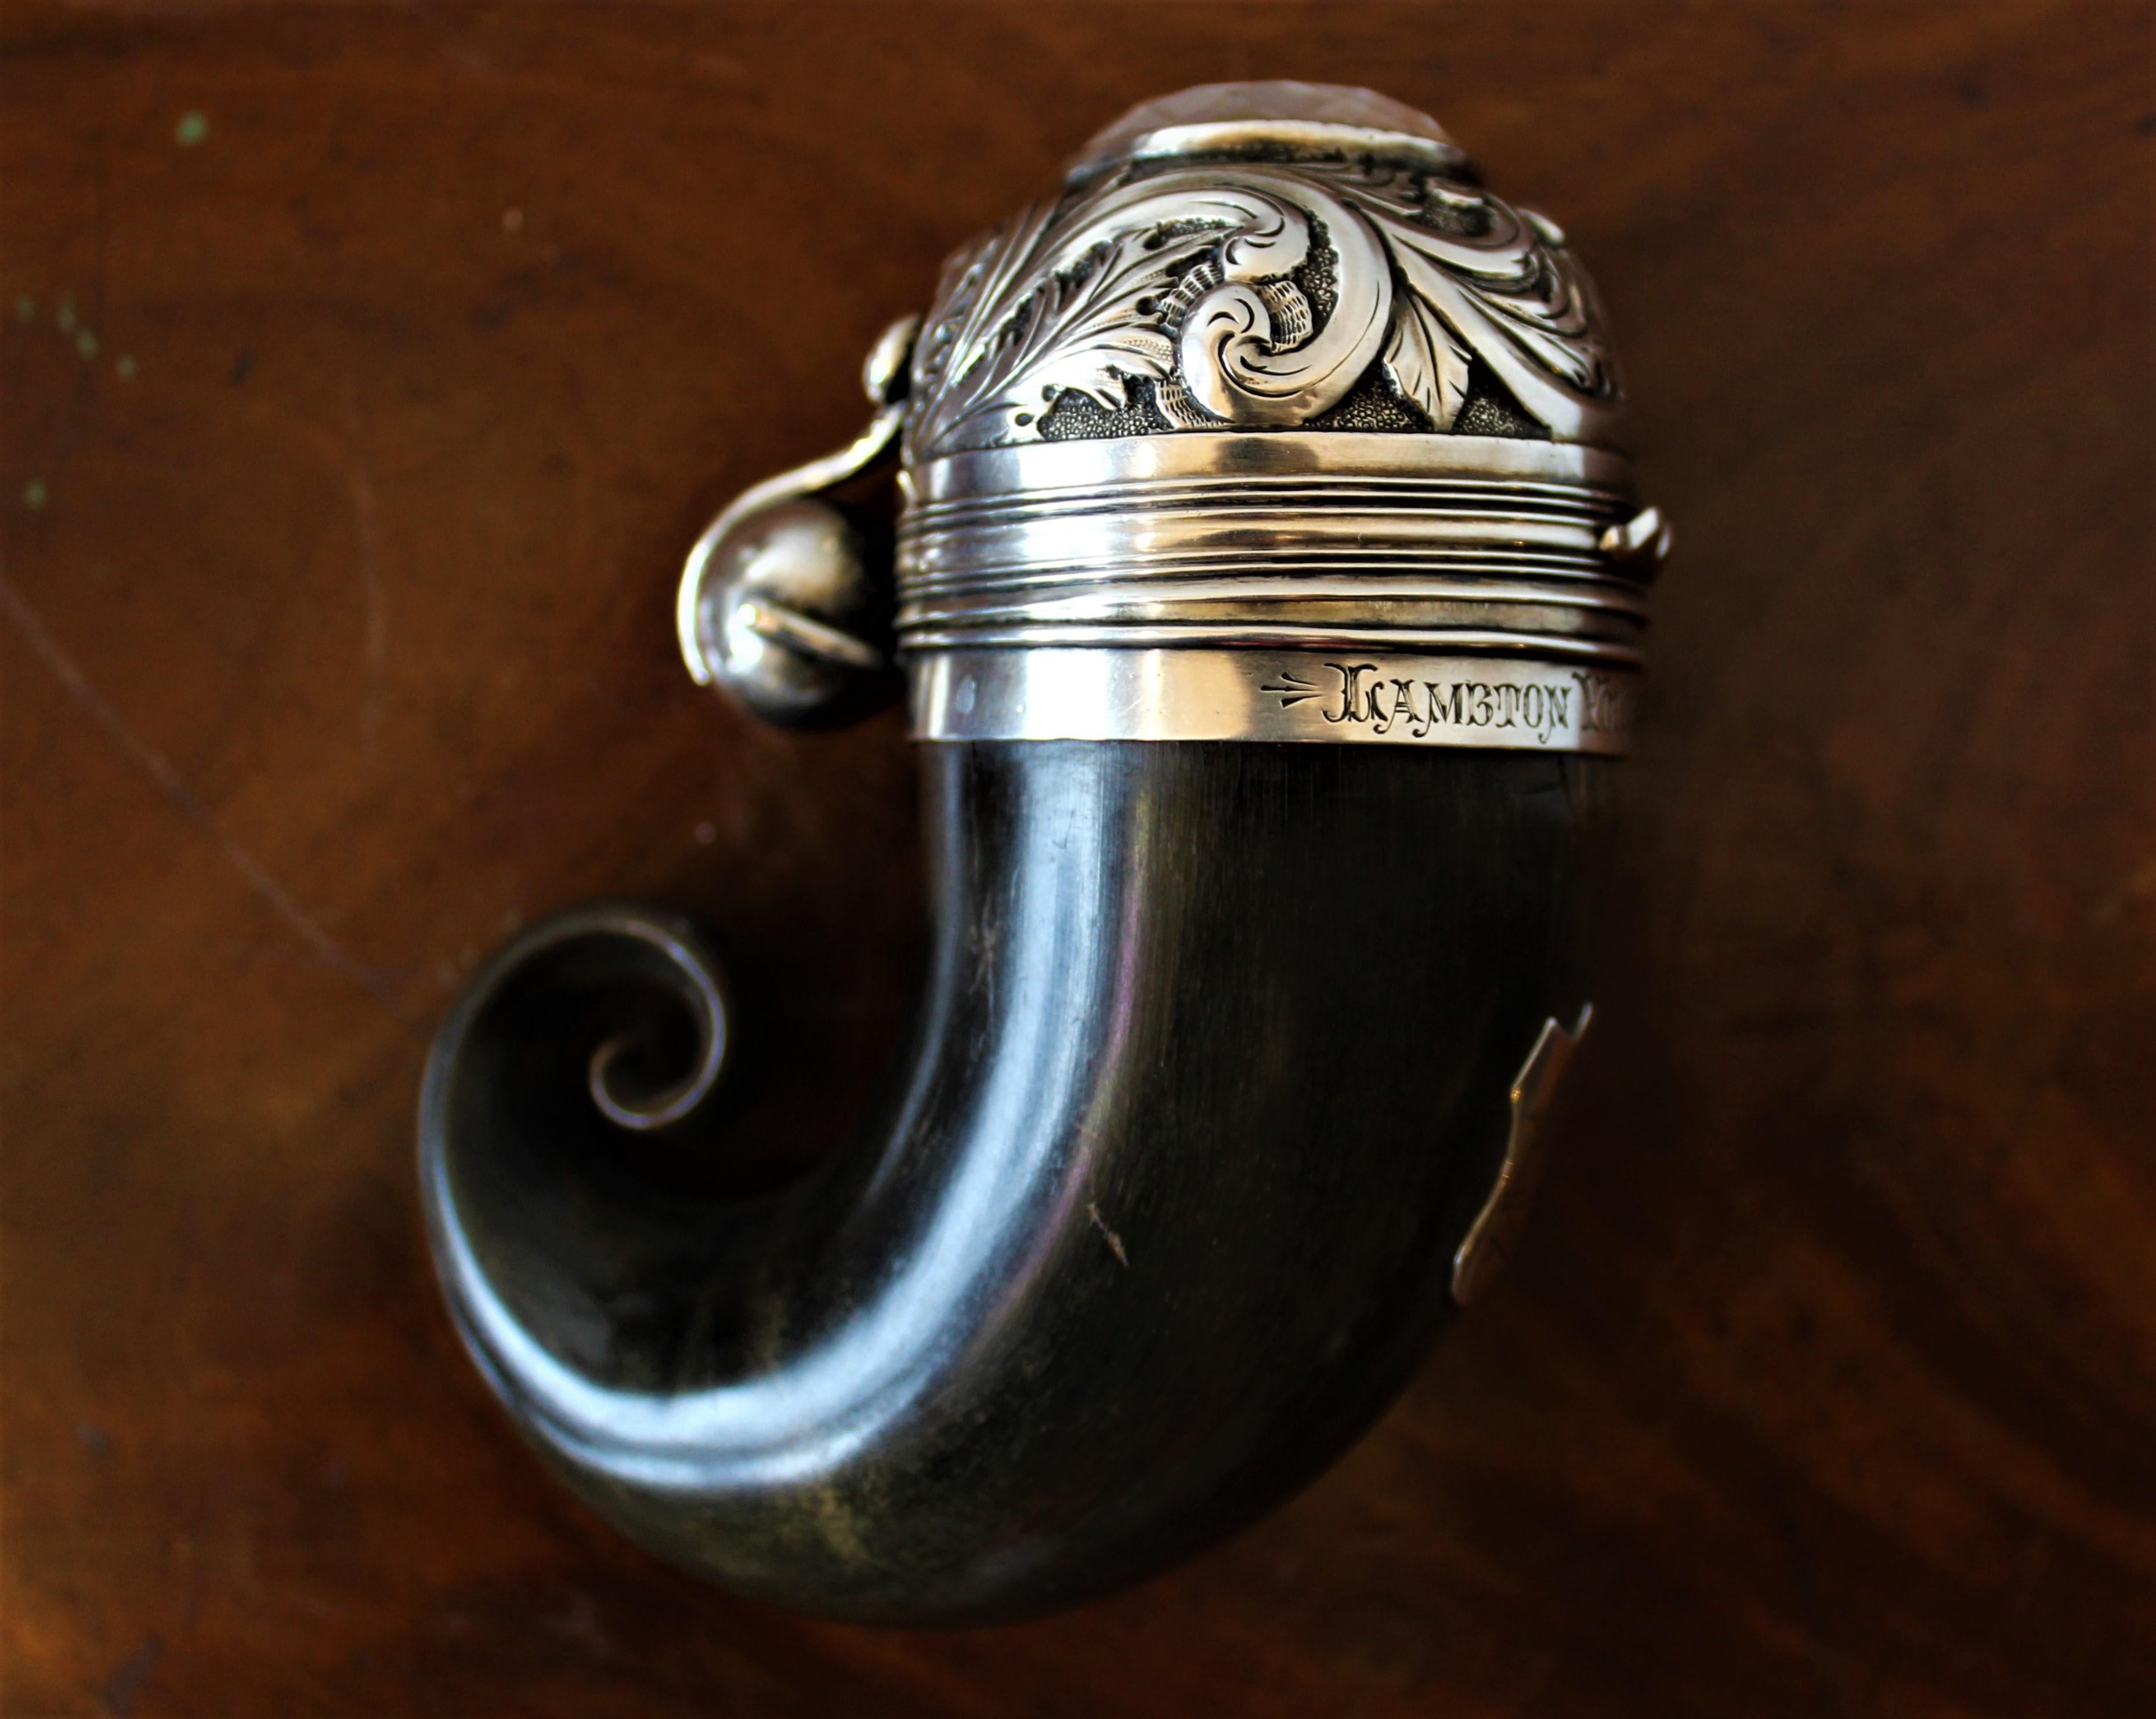 Dating from the early 19th century, this Scottish polished Horn and sterling silver mounted snuff mull is heavily engraved. Inlaid on the top is a large cabachon cut citrine stone. The mull is marked 